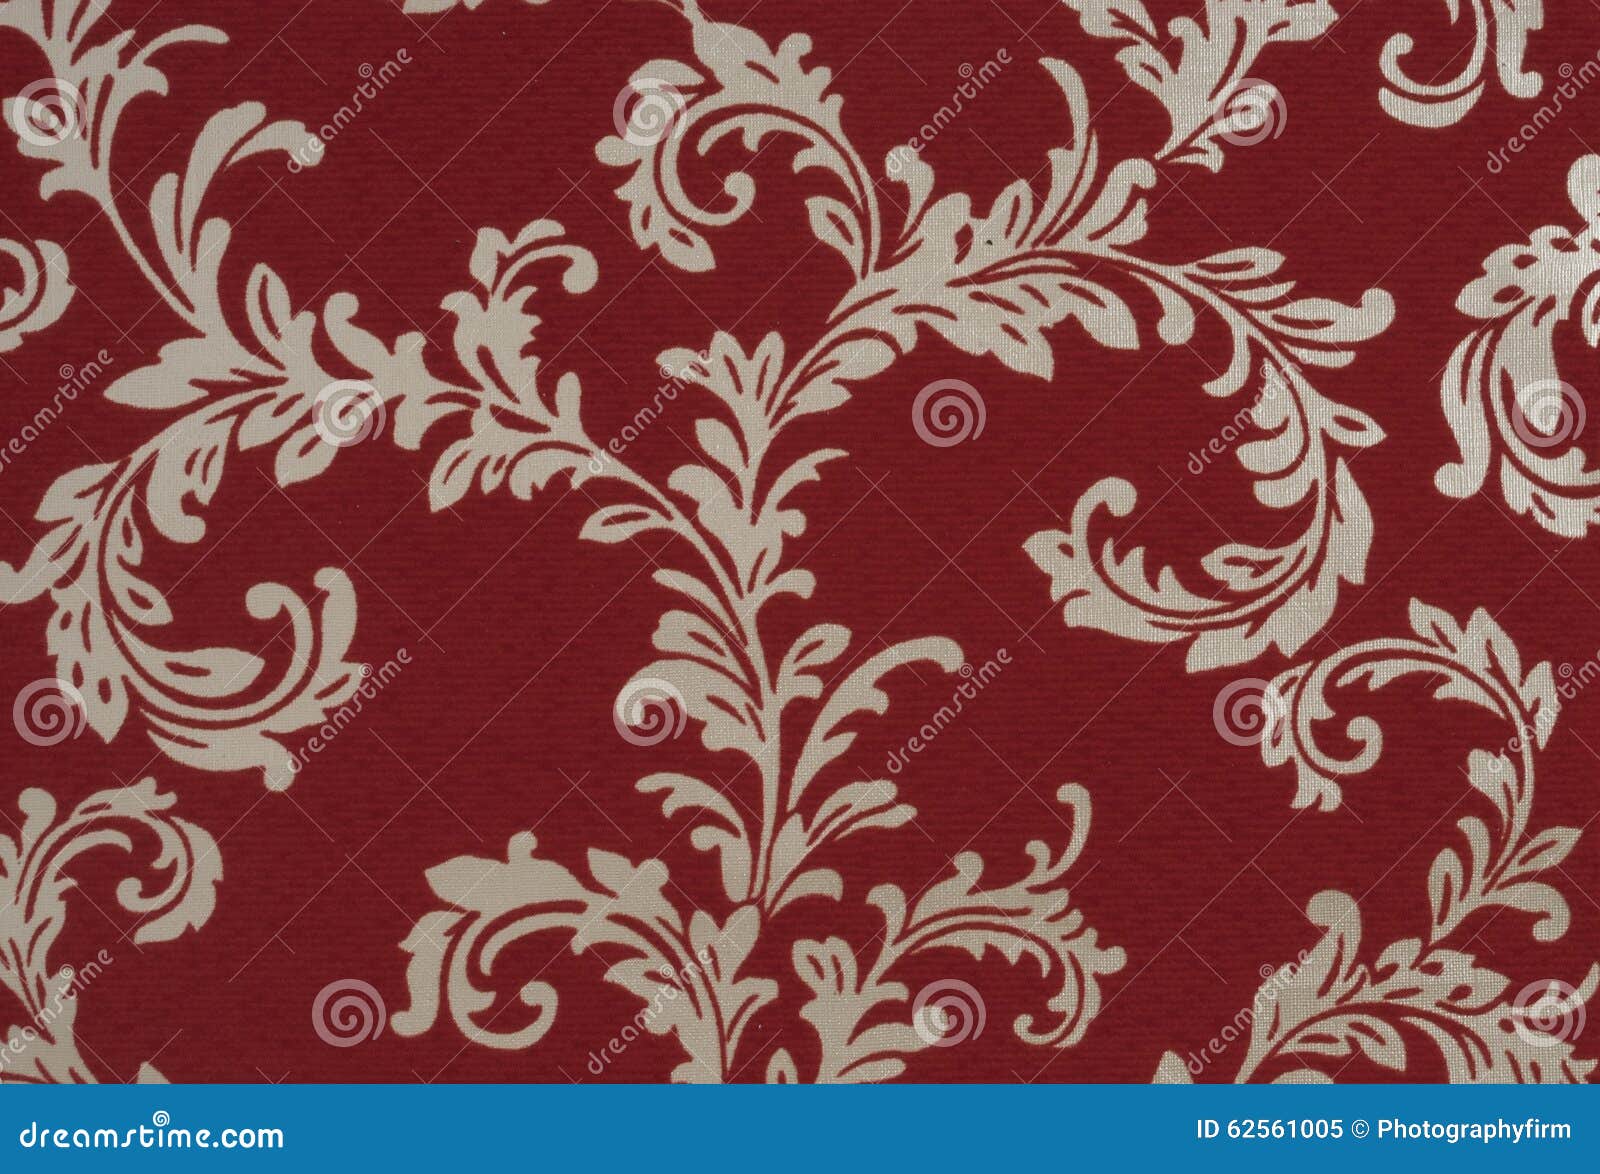 Flock wallpaper stock image. Image of pattern, tablecloth - 62561005